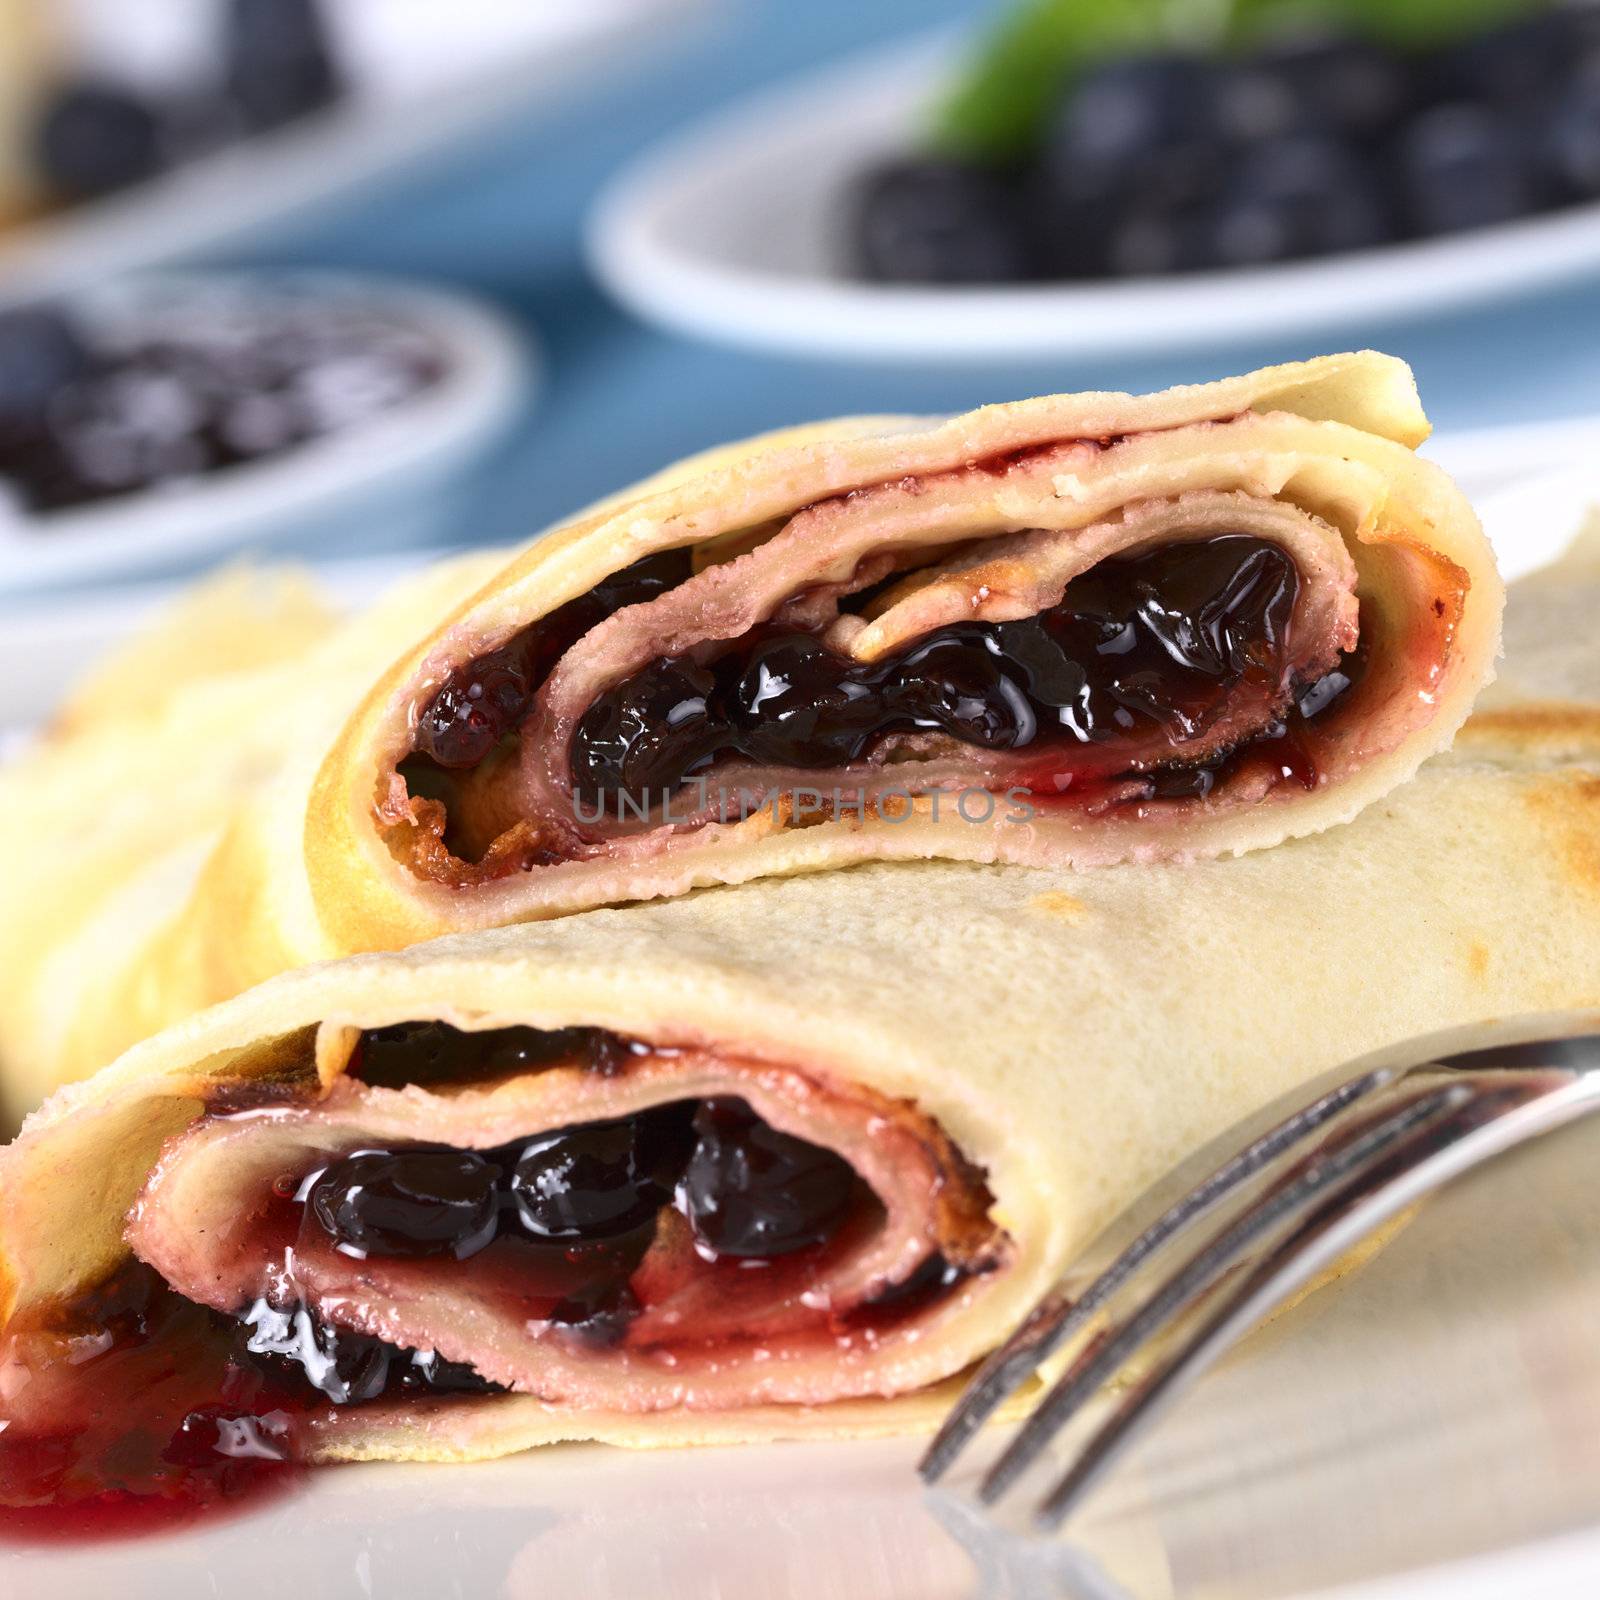 Pancakes Filled with Blueberry Jam by ildi